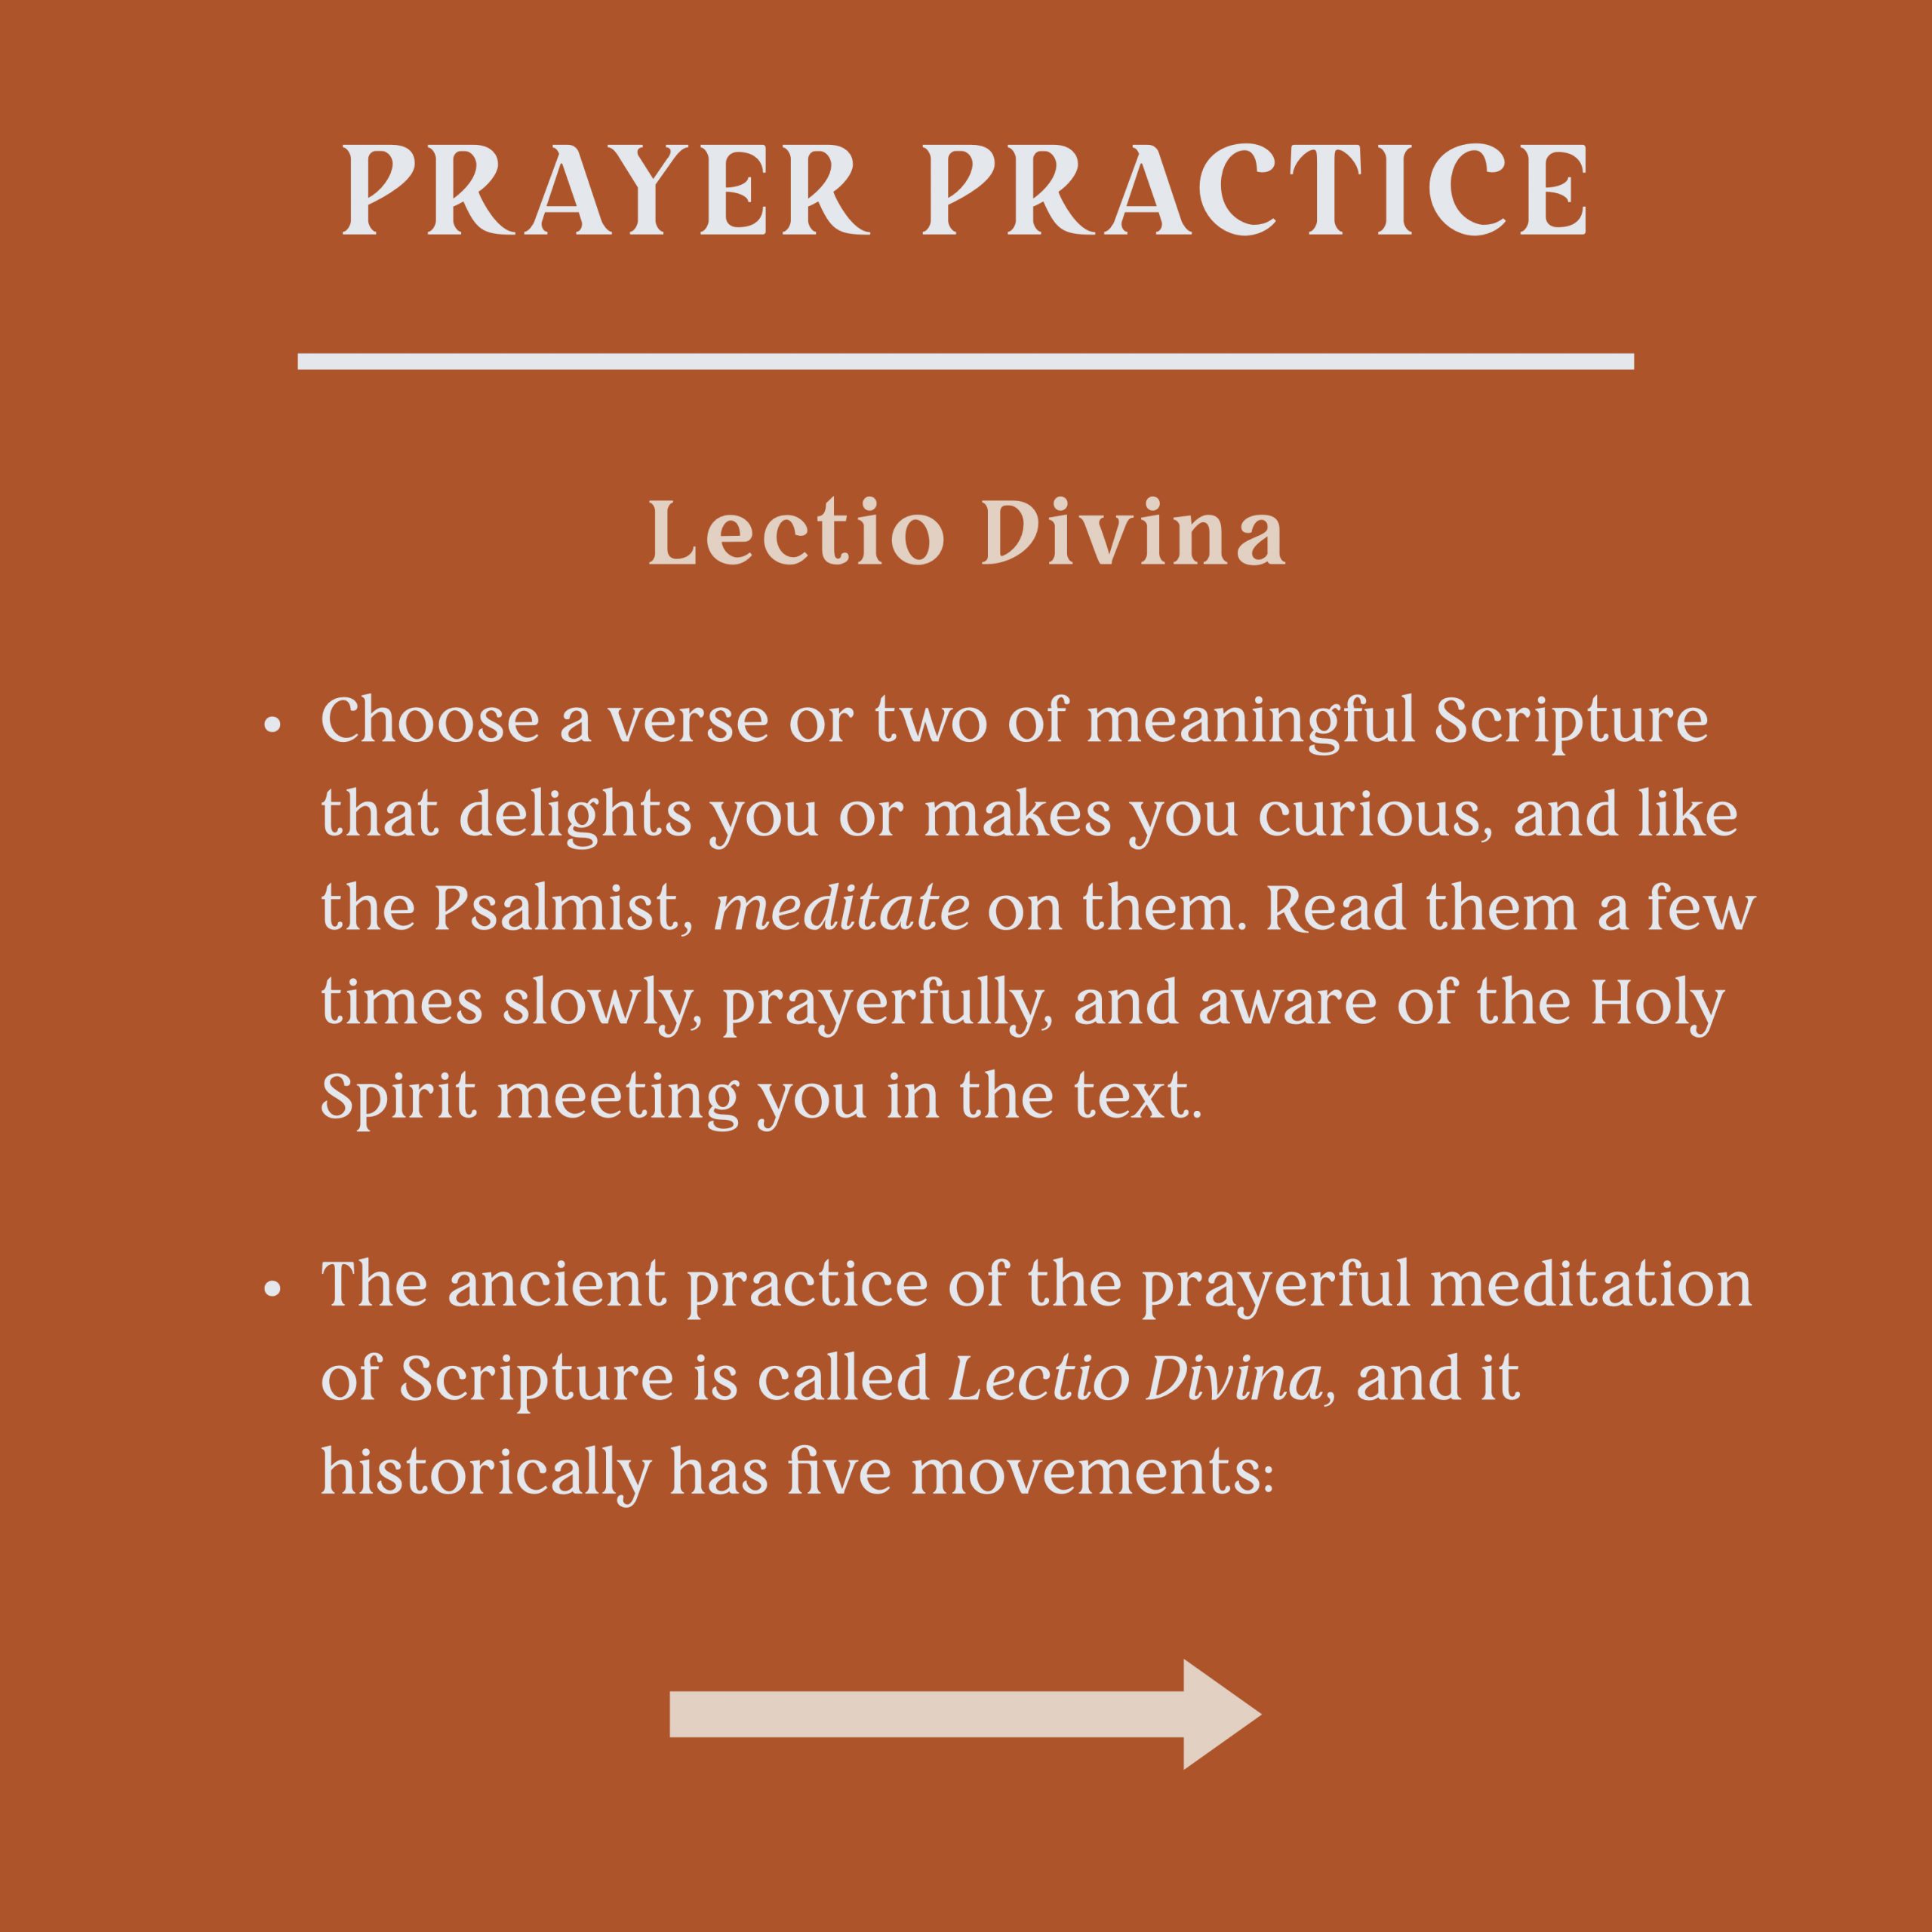 Prayer Practice
Lectio Divina
Choose a verse or two of meaningful scripture that delights you or makes you curious and like the Psalmist, meditate on them. Read them a few times slowly, prayerfully, and aware of the Holy Spirit meeting you in the text.
The ancient practice of prayerful meditation of Scripture is called Lectio Divina, and it historically has five movements: 